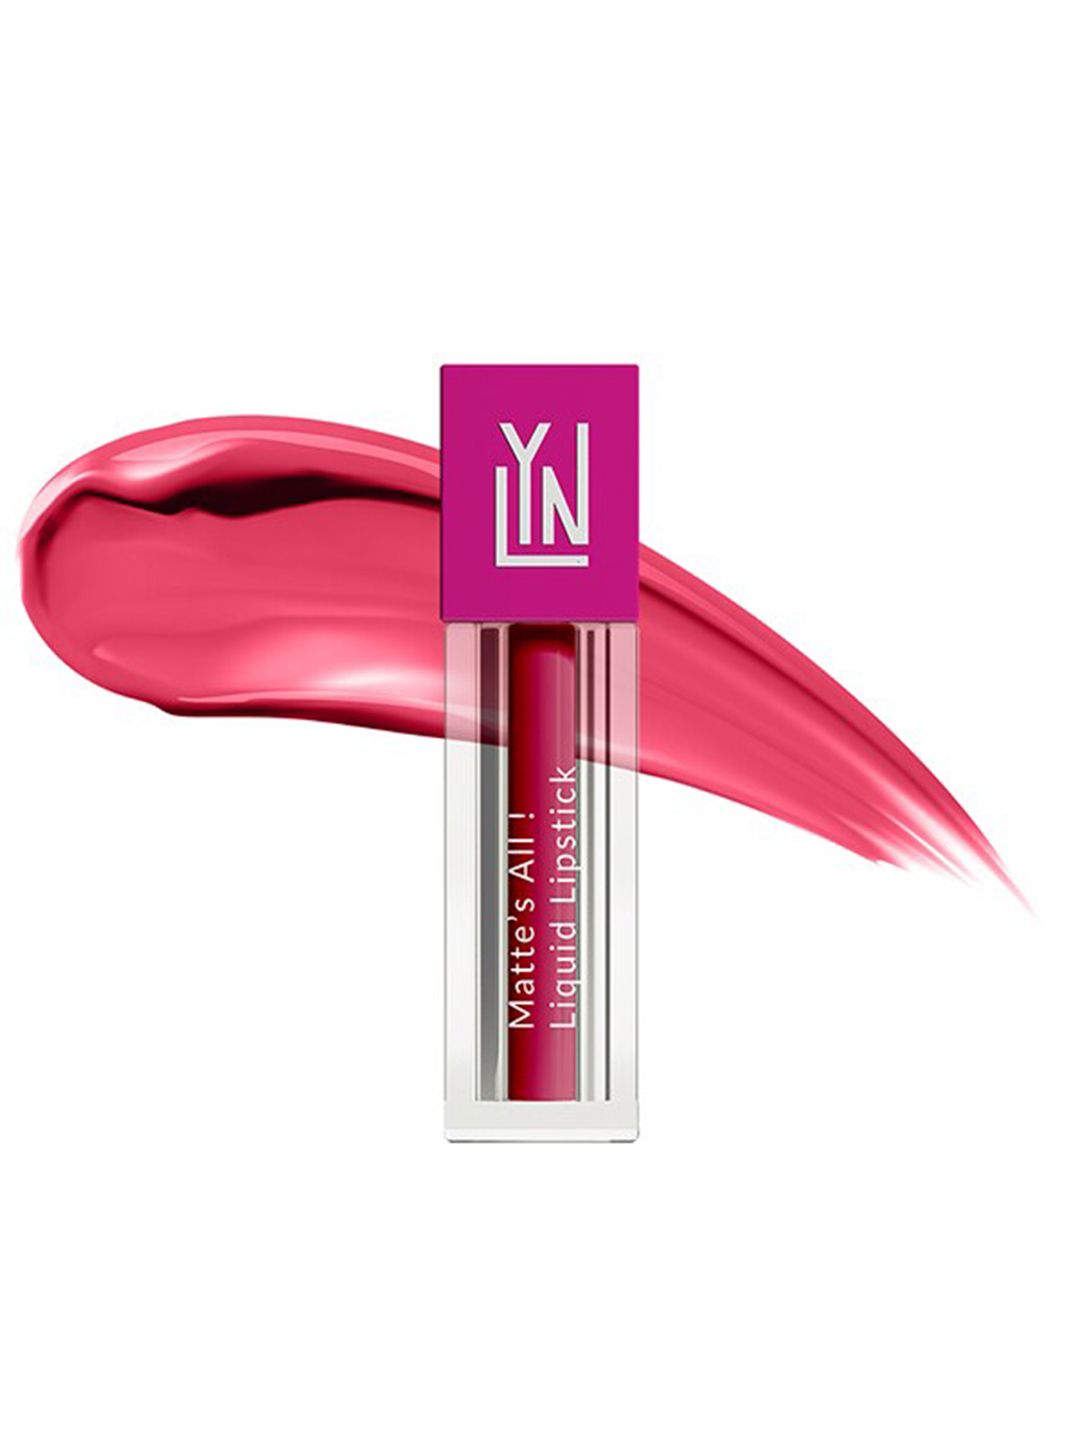 LYN LIVE YOUR NOW Matte Liquid Lipstick-Pink Lush 1ml Price in India